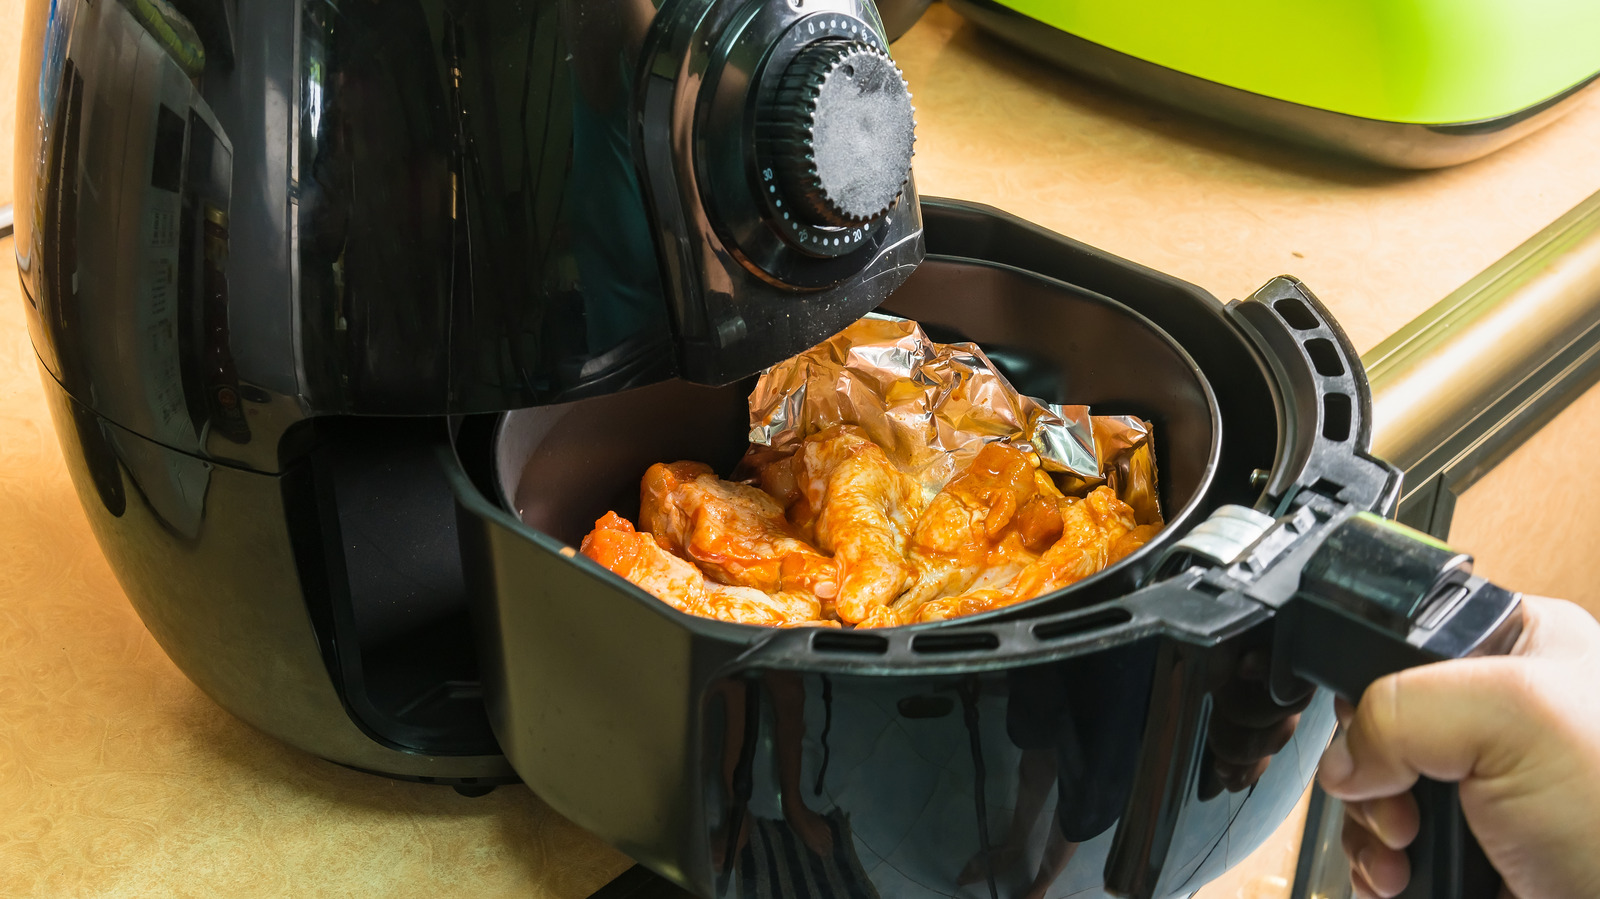 Best Small Air Fryers for Saving Space